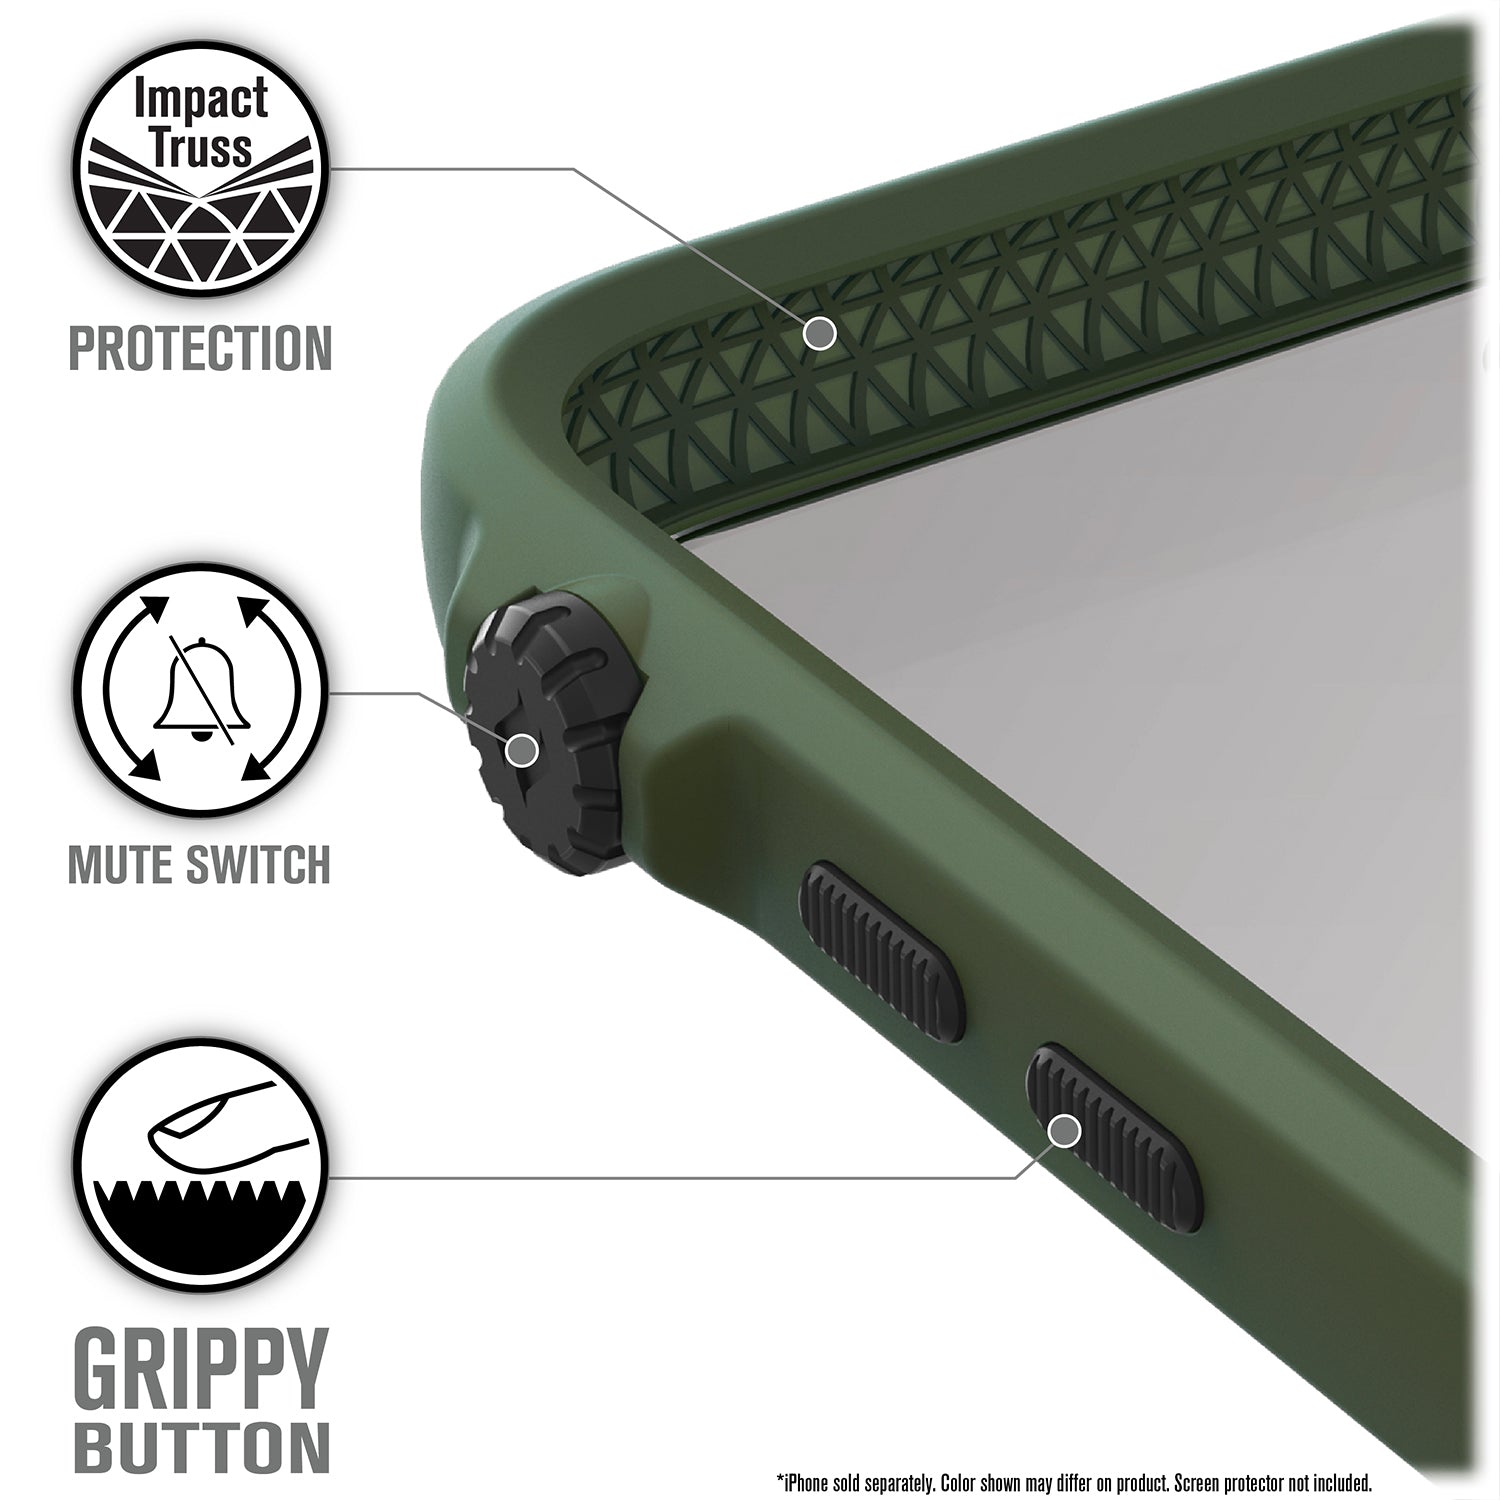 Catalyst iphone 8/7 impact protection case showing the case's geometrical design in a army green colorway text reads impact truss protection mute switch grippy button